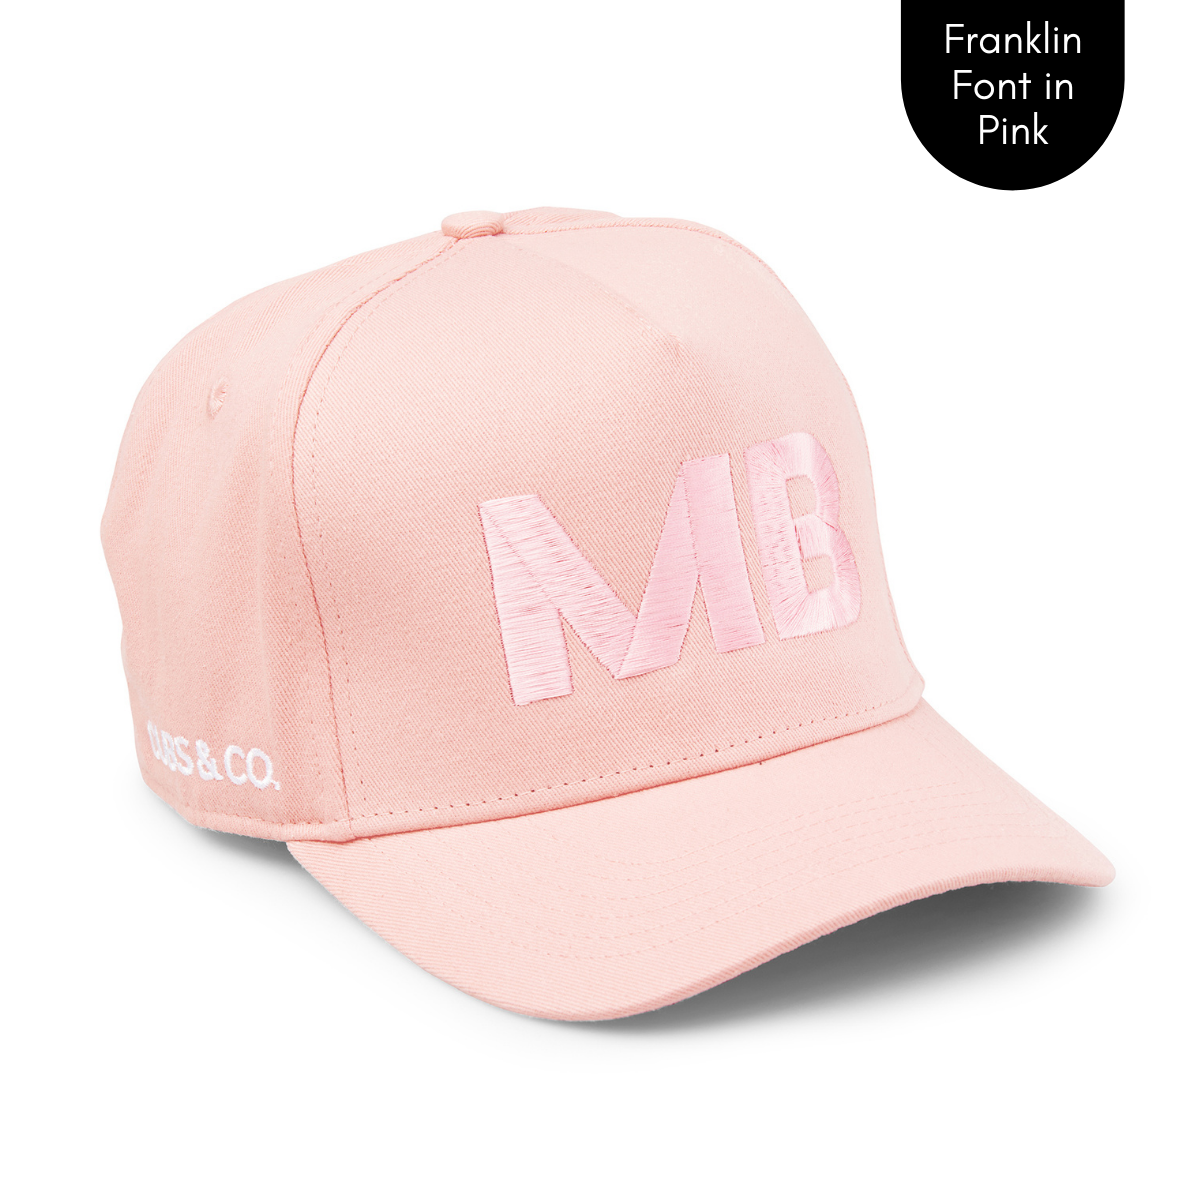 Cubs & Co - PERSONALISED PINK W/ INITIALS | FRANKLIN PINK FONT